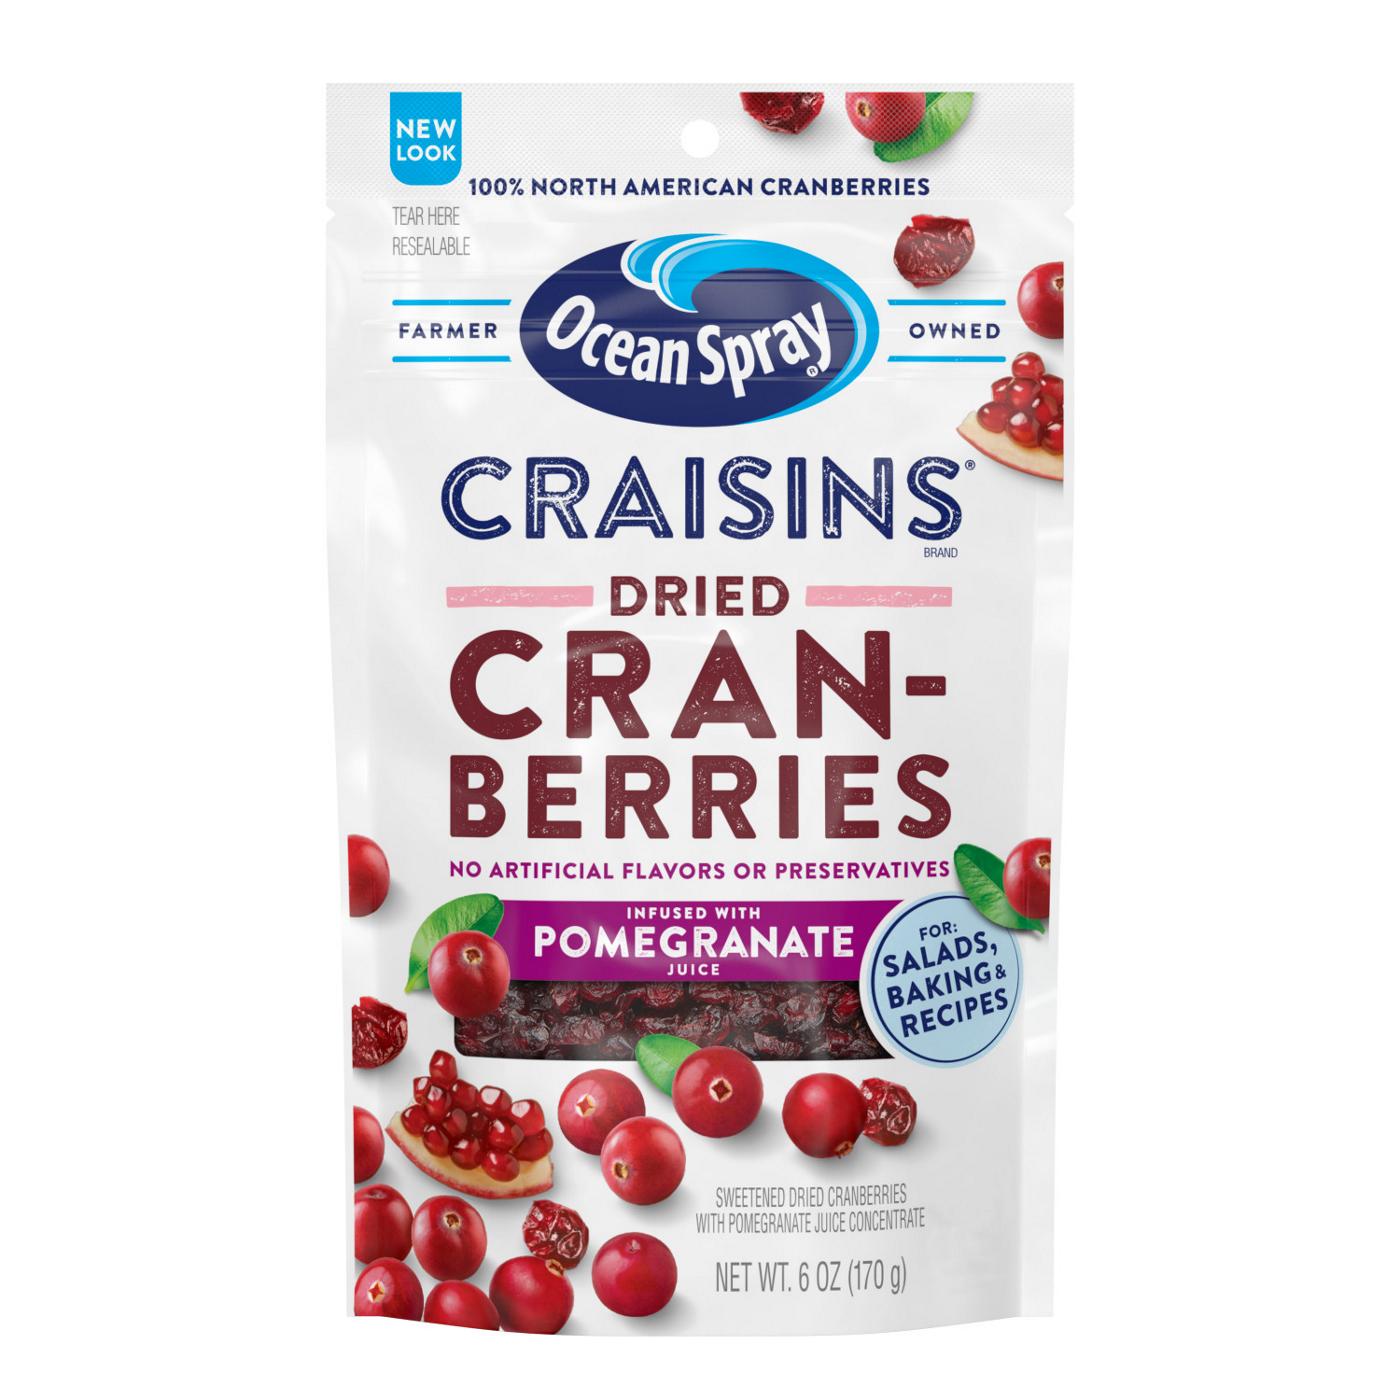 Ocean Spray Craisins Pomegranate Juice Infused Dried Cranberries; image 1 of 6